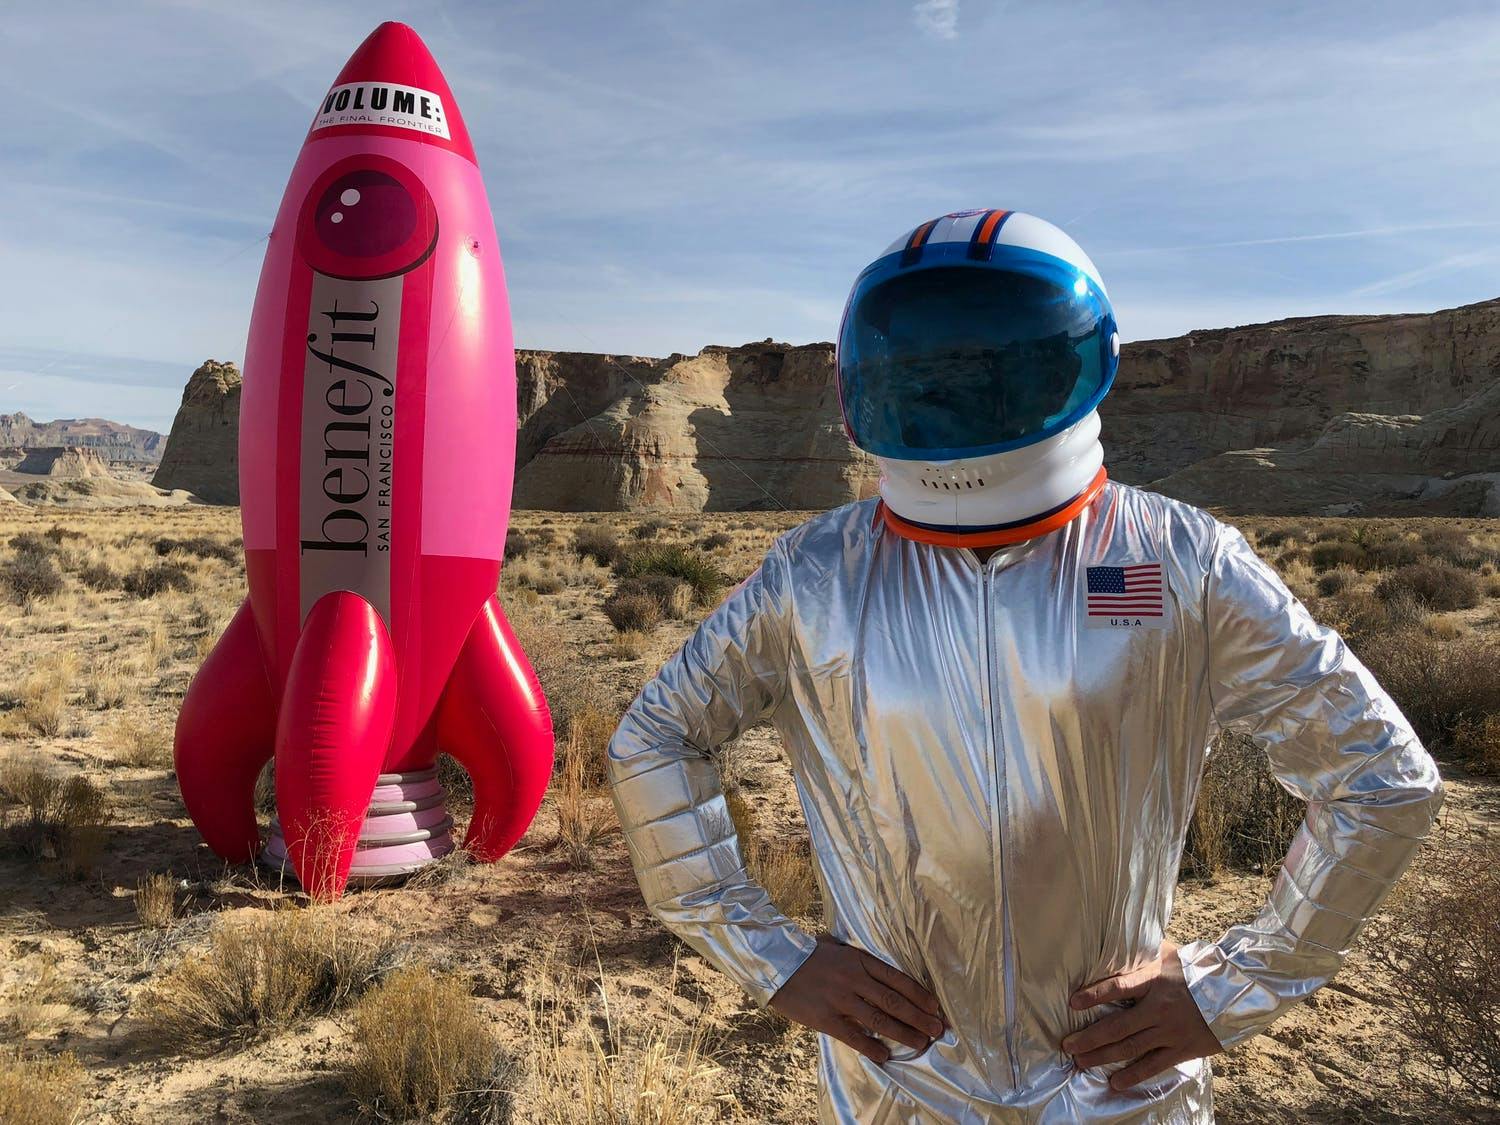 Benefit Cosmetics global launch in desert with pink rocket and costumed astronaut | PartySlate